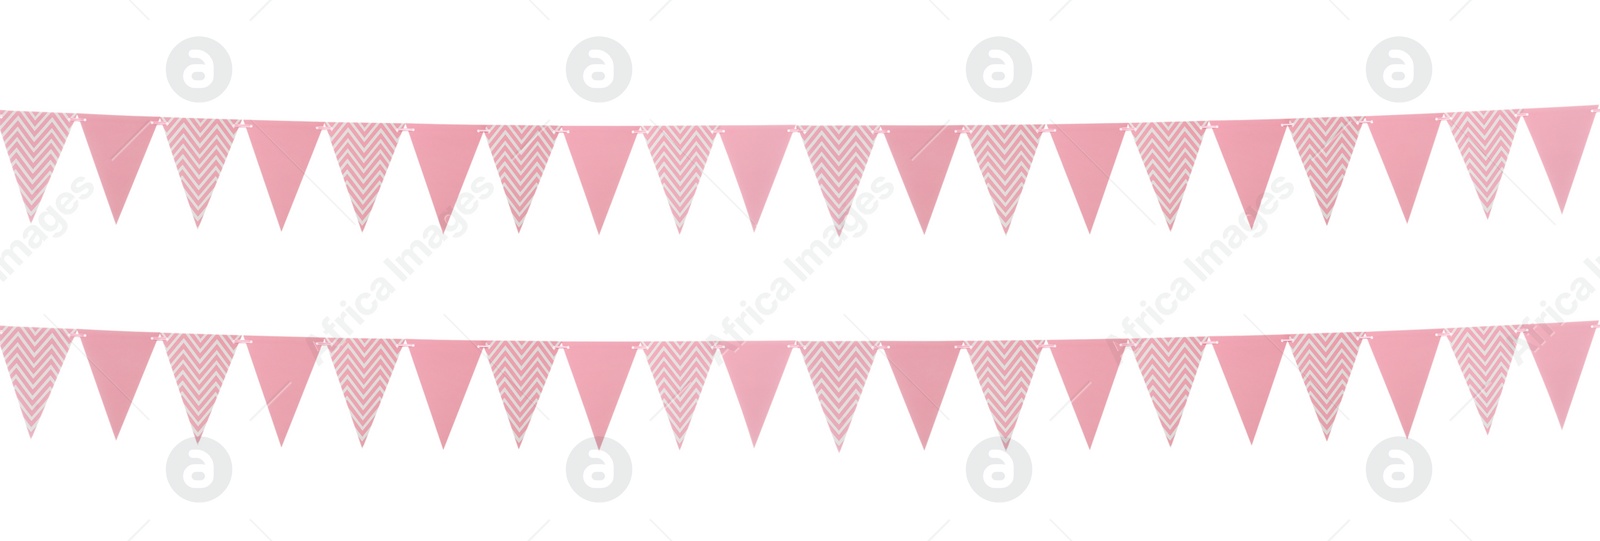 Image of Pink triangular bunting flags on white background, banner design. Festive decor